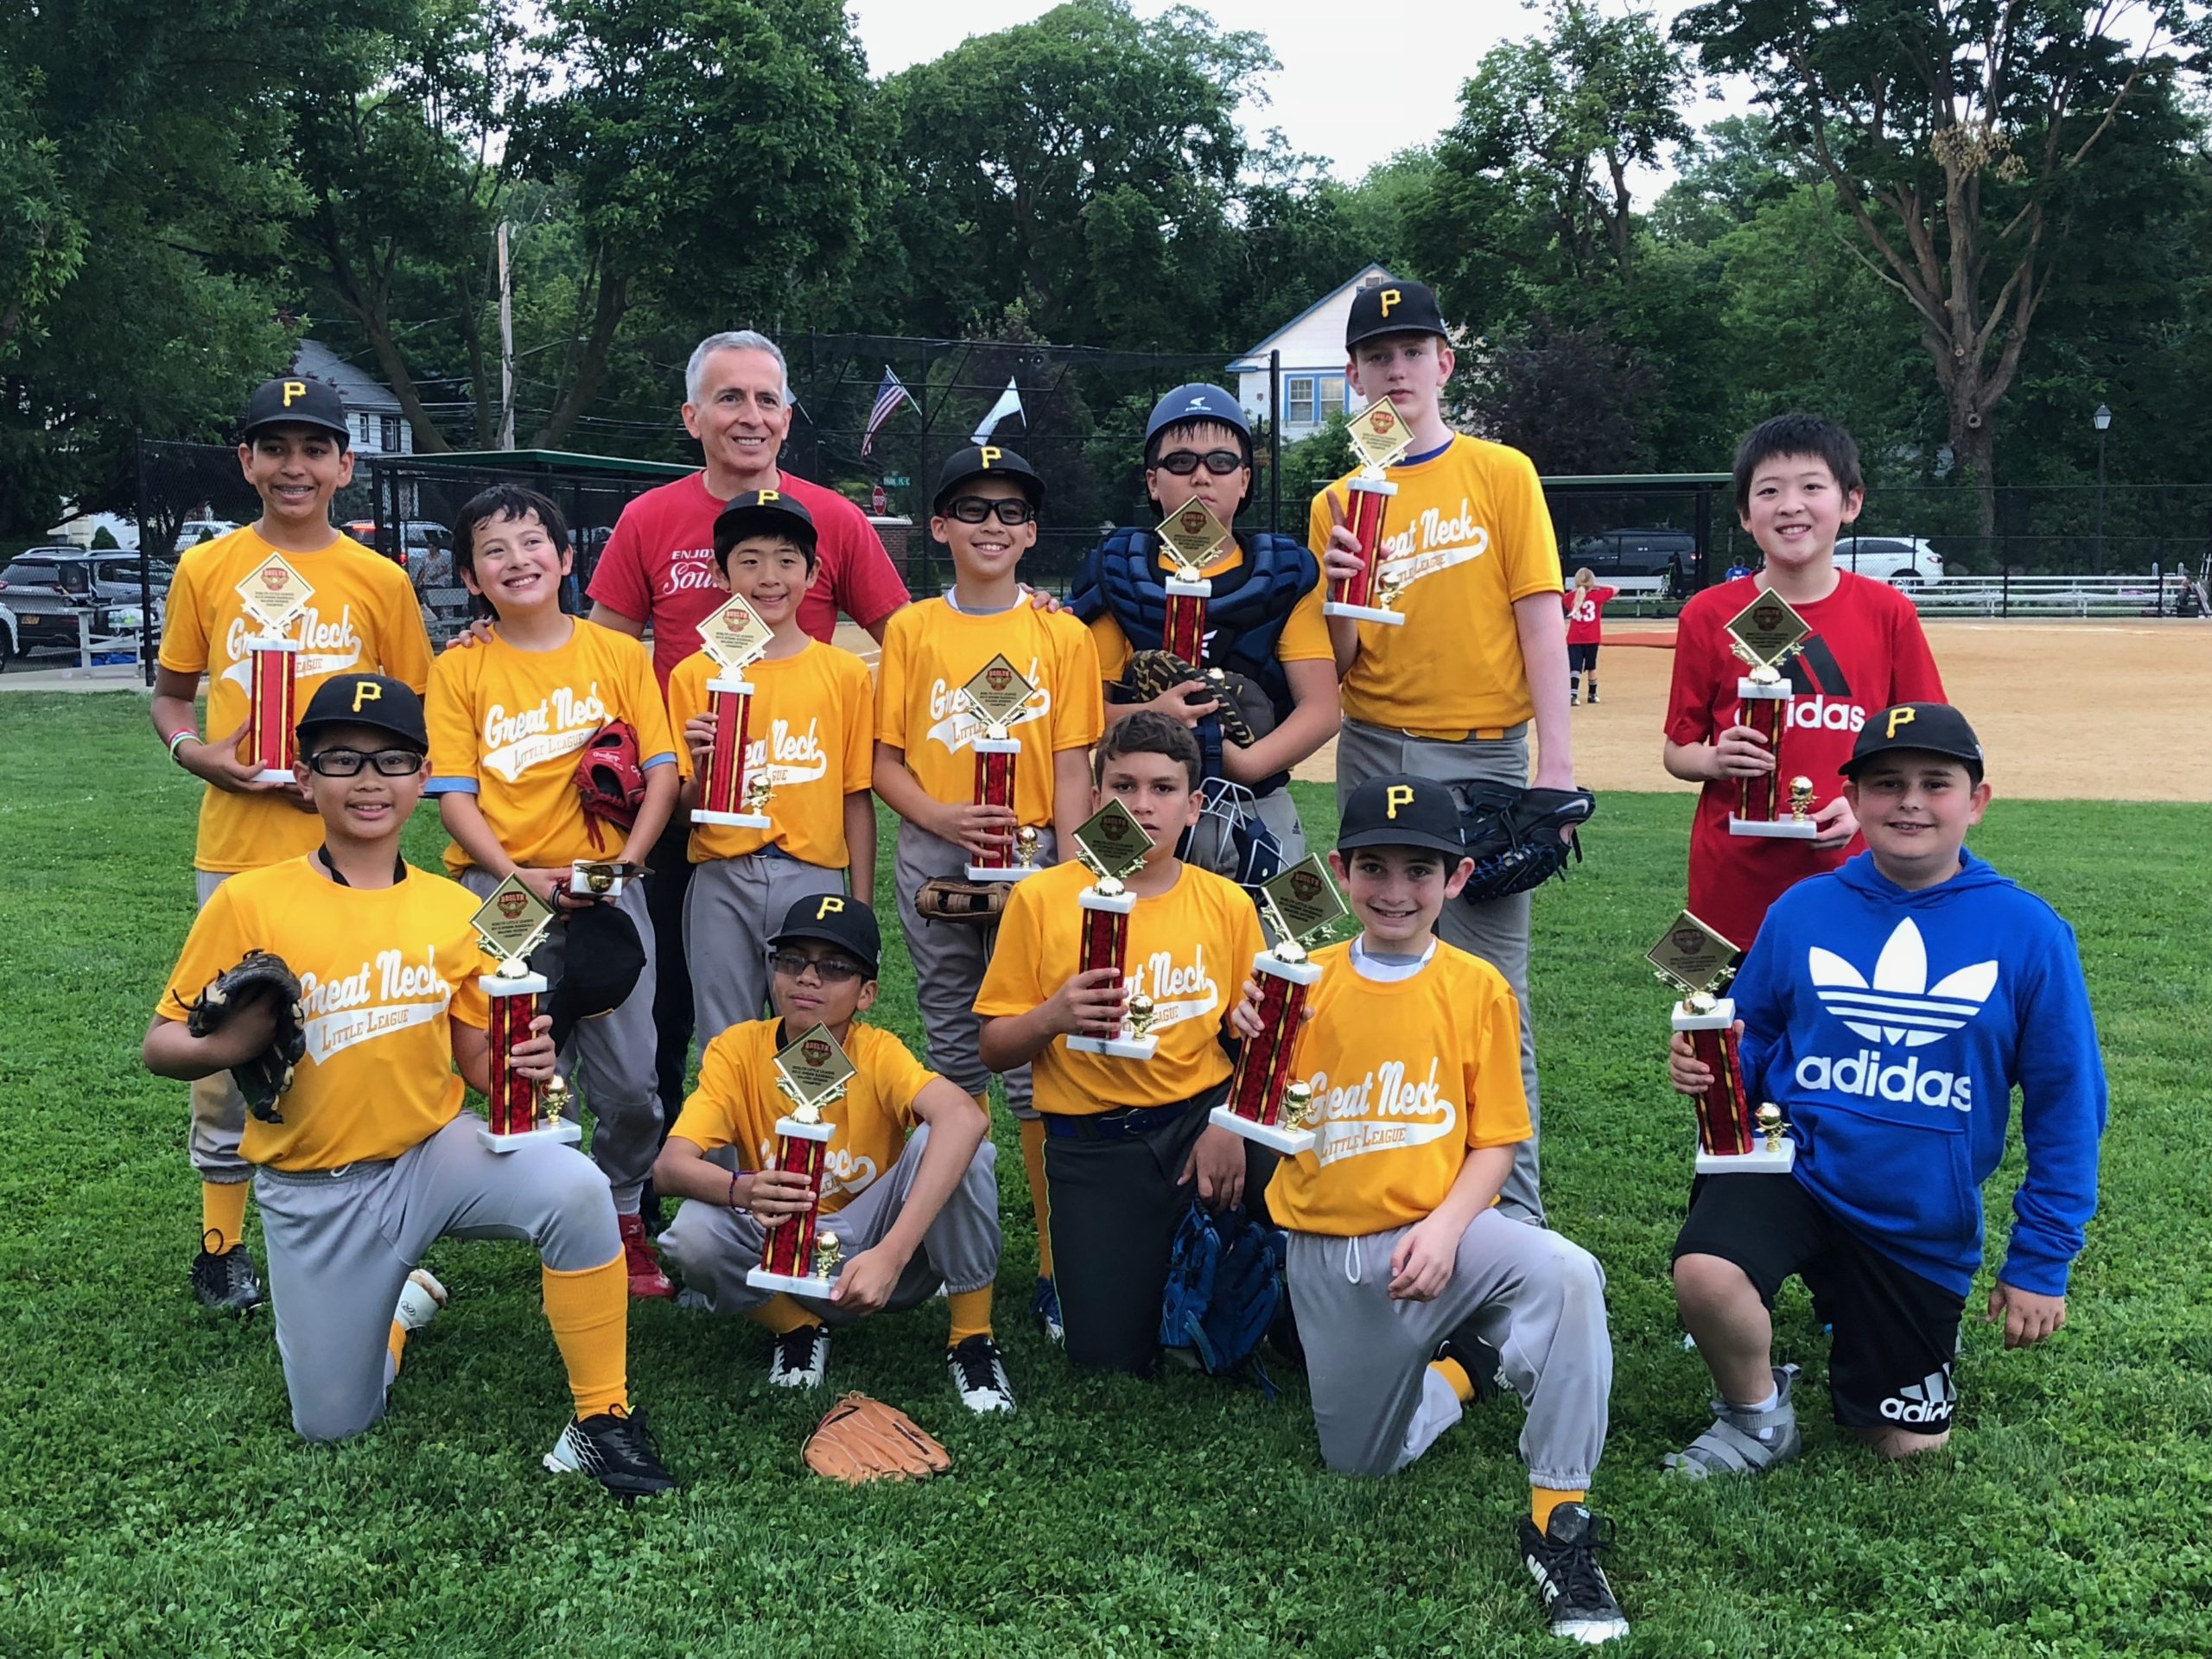 Jeremy Chuck, Eduardo Flores, Andrew Lentini, Noah Scheidt, Andrew Hirshbein, Aman Thawani, James Cenawood, Adrien Wei, Cooper Sang, William Ouyang, Richard Deem, Shaun Wei and Coach Sean Cenawood swept this year's Little League season. (Photo courtesy of the Pirates of Great Neck Little League)